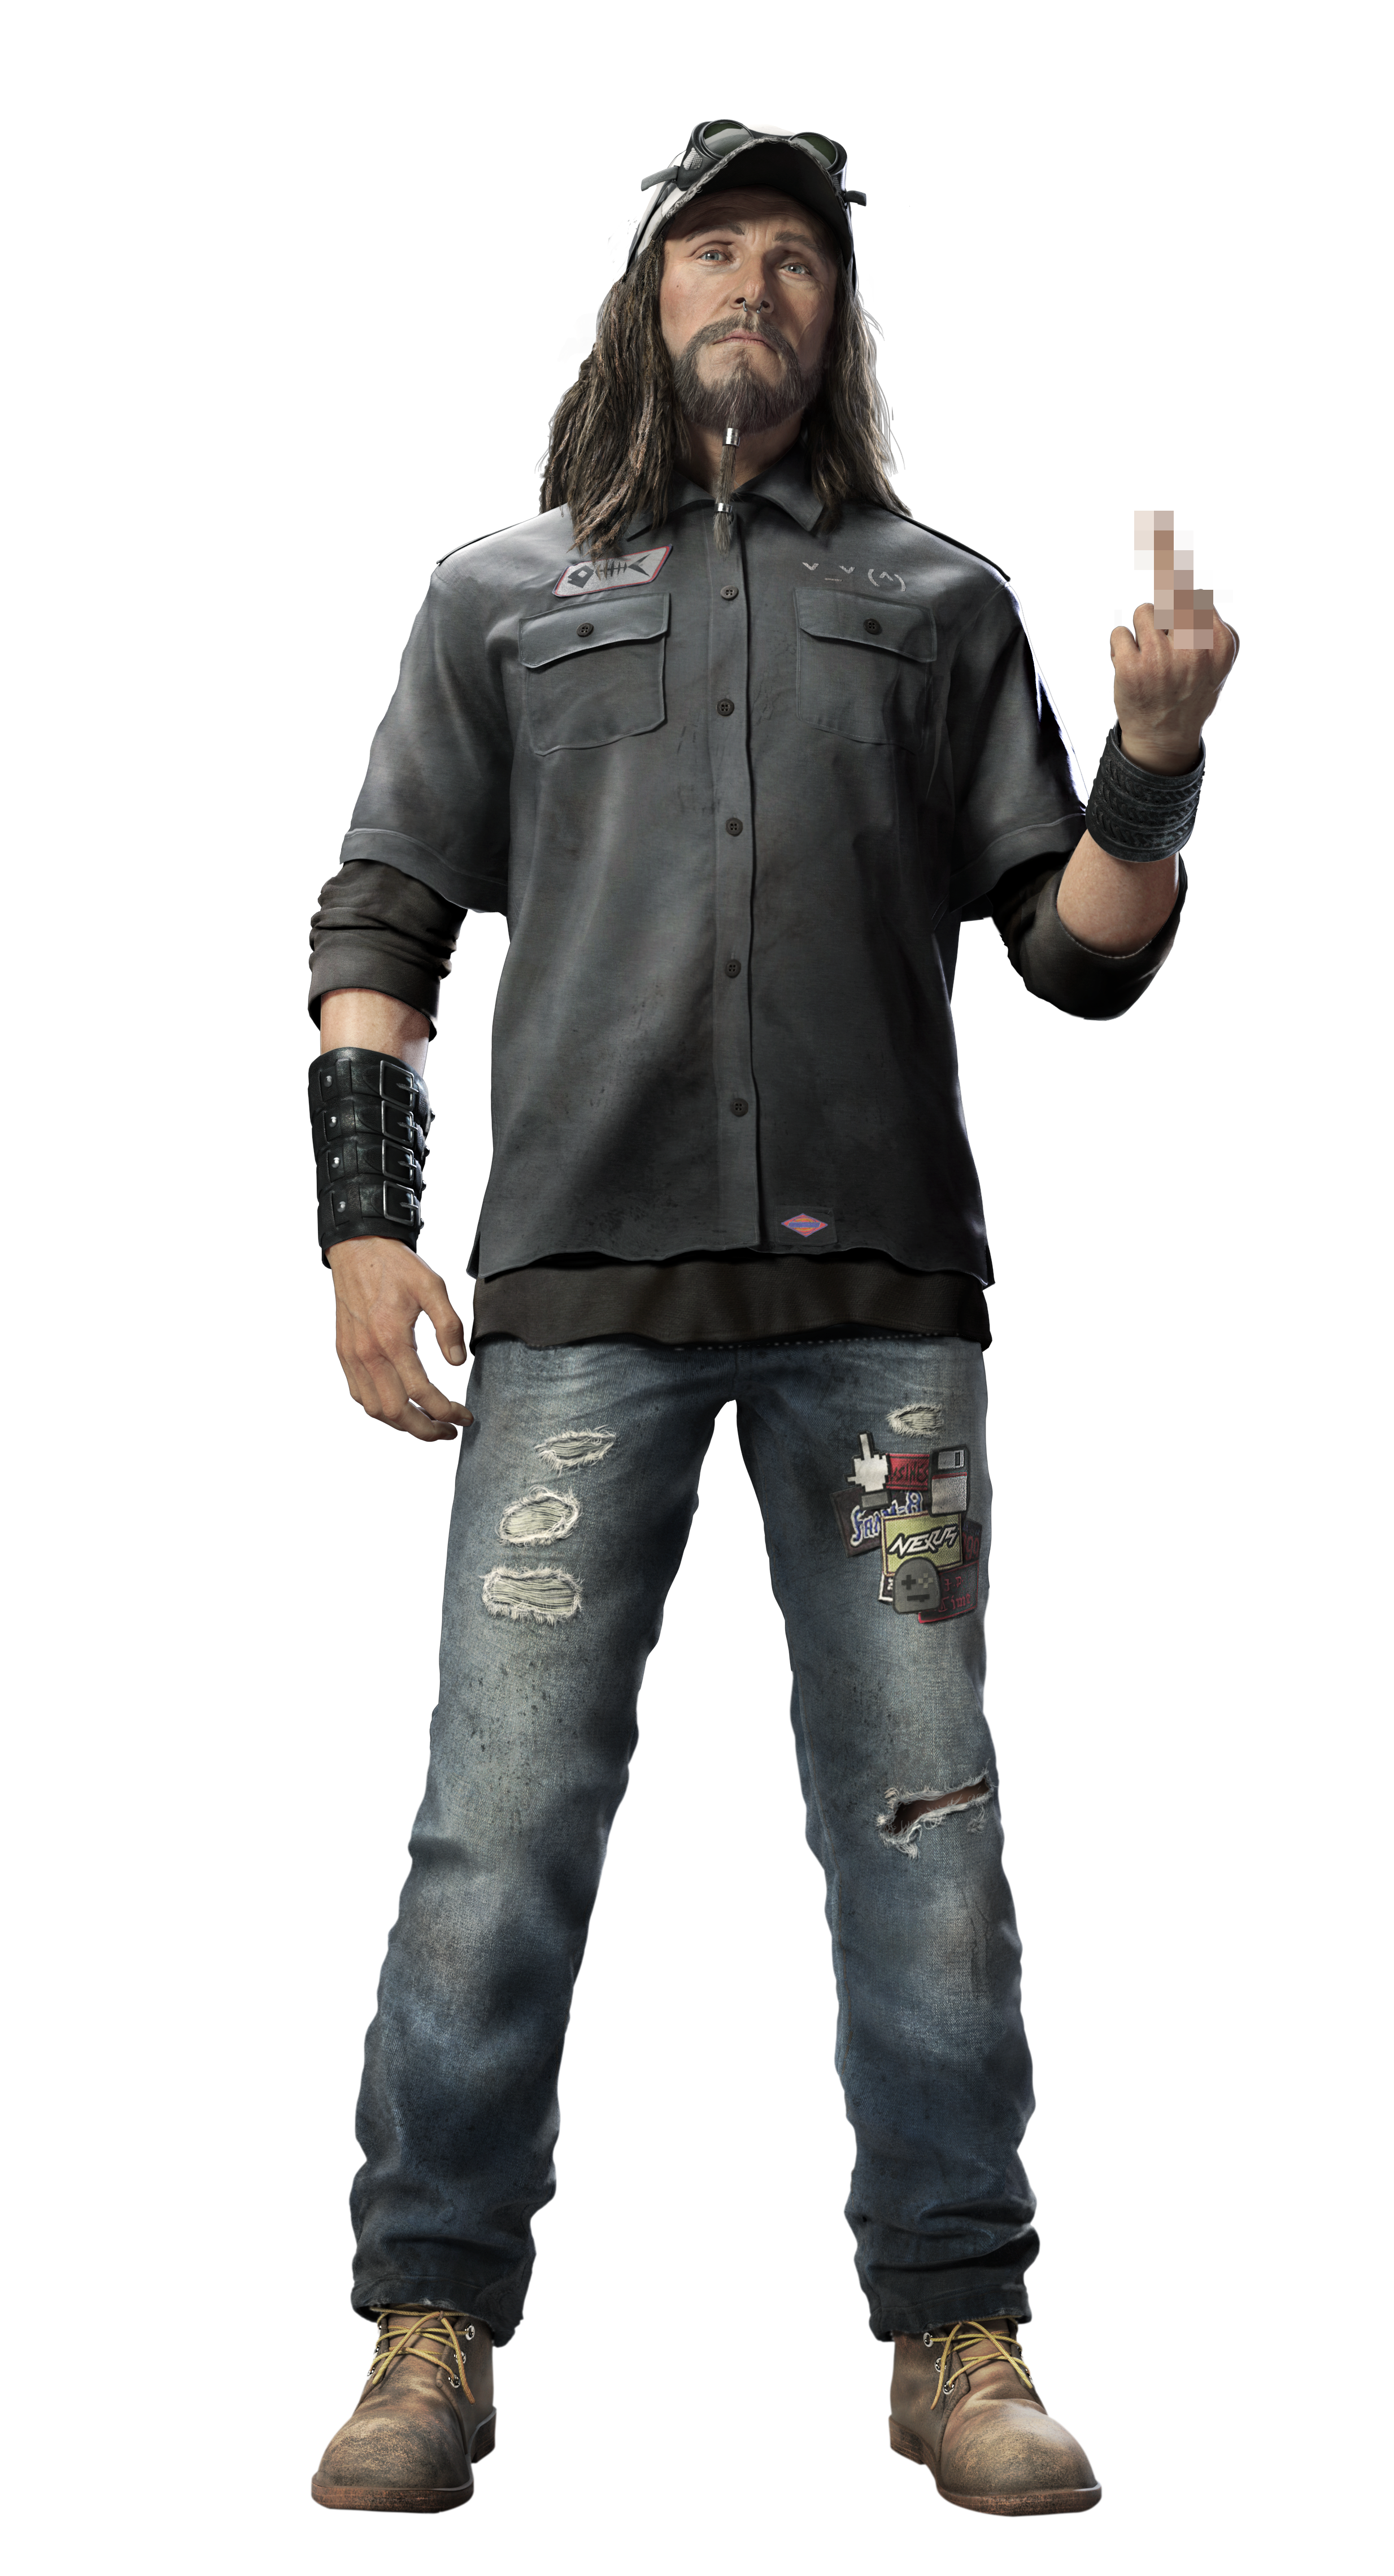 watch dogs 2 characters